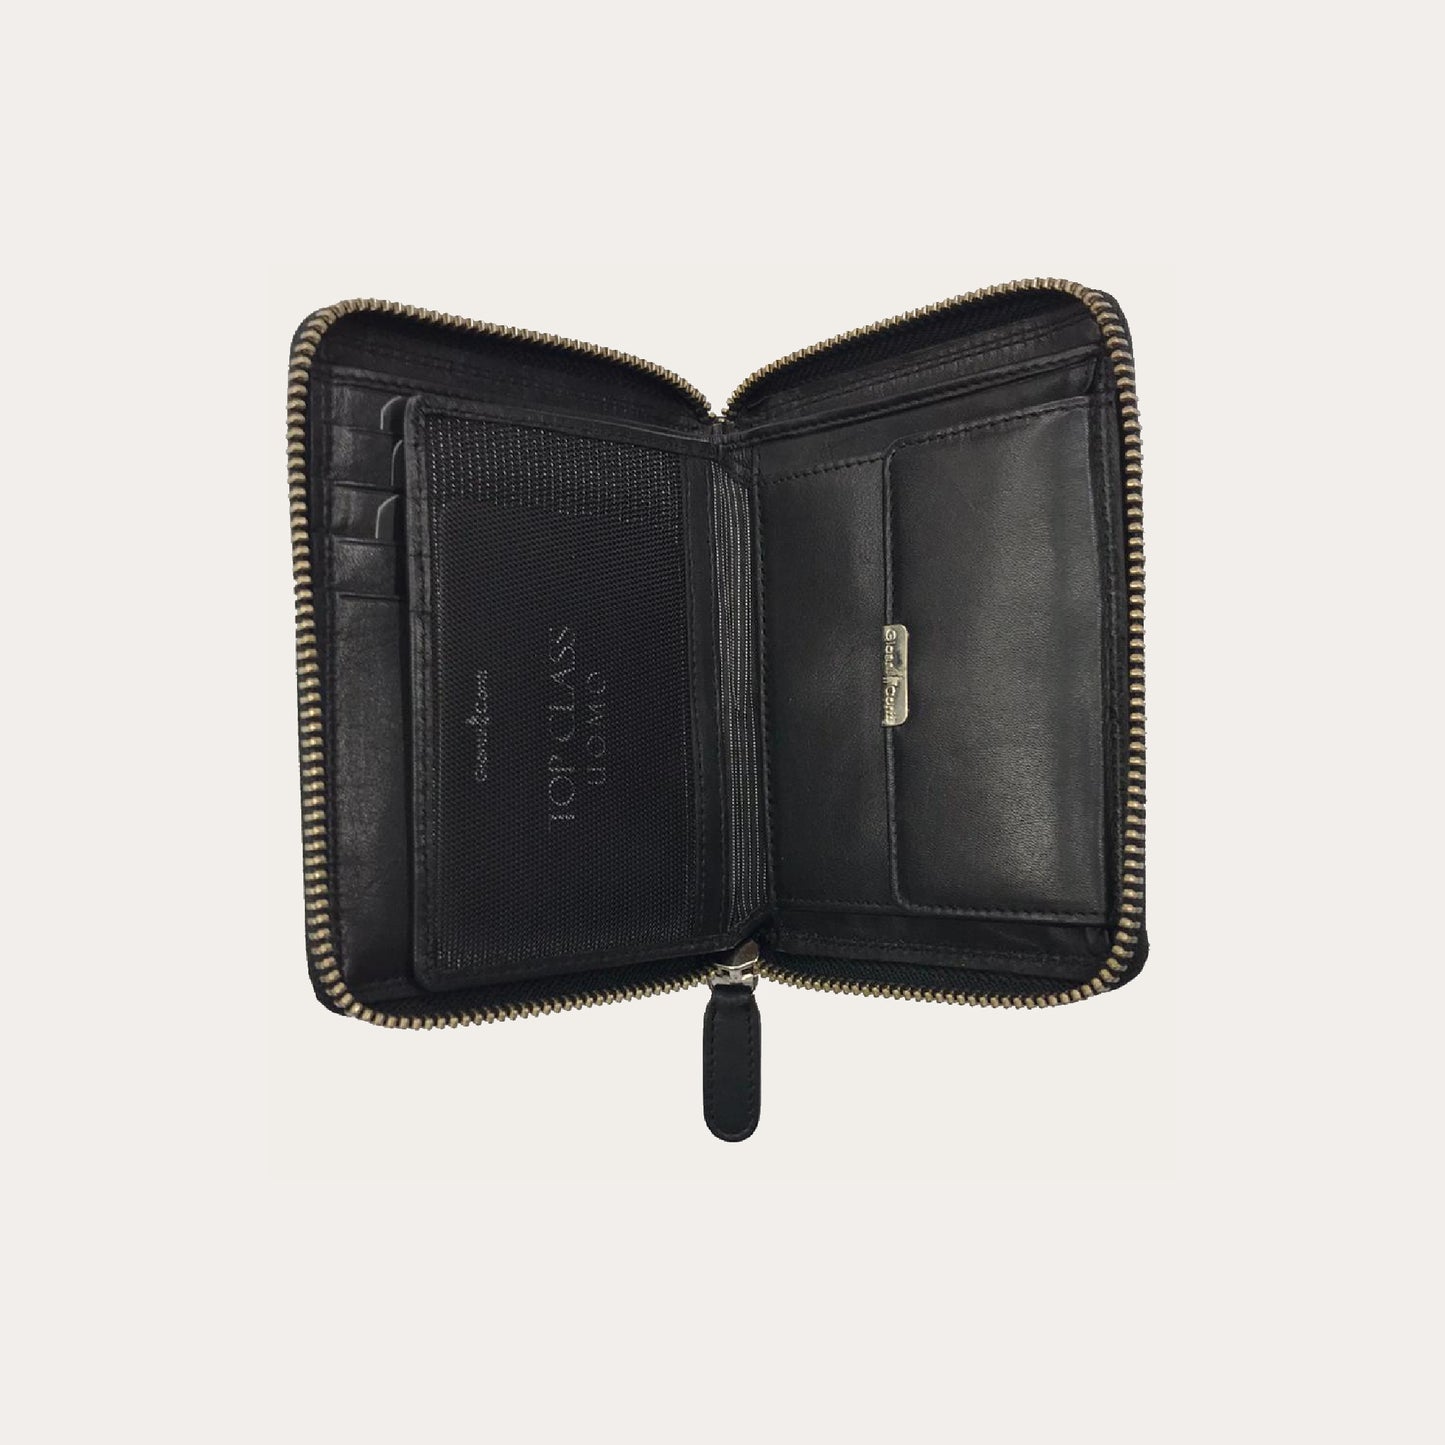 Gianni Conti Black Leather Wallet-8 Credit Card/Coin Section